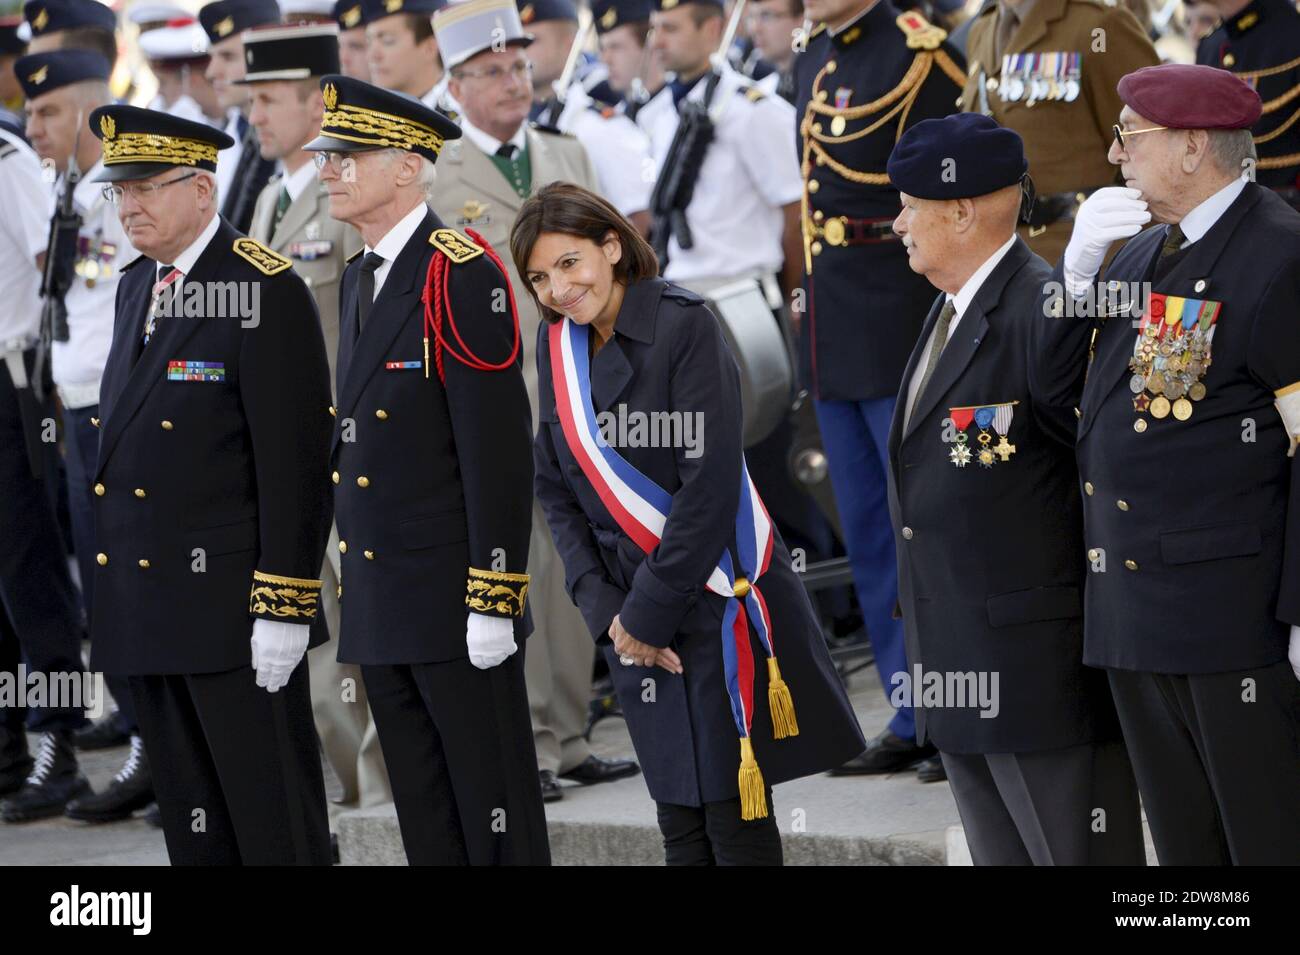 Anne Hidalgo Paris Mayor attends a wreath laying ceremony on the Tomb of the Unknown Soldier at the Arc de Triomphe in Paris, France on June 5, 2014. Photo by Gilles Rolle/Pool/ABACAPRESS.COM Stock Photo